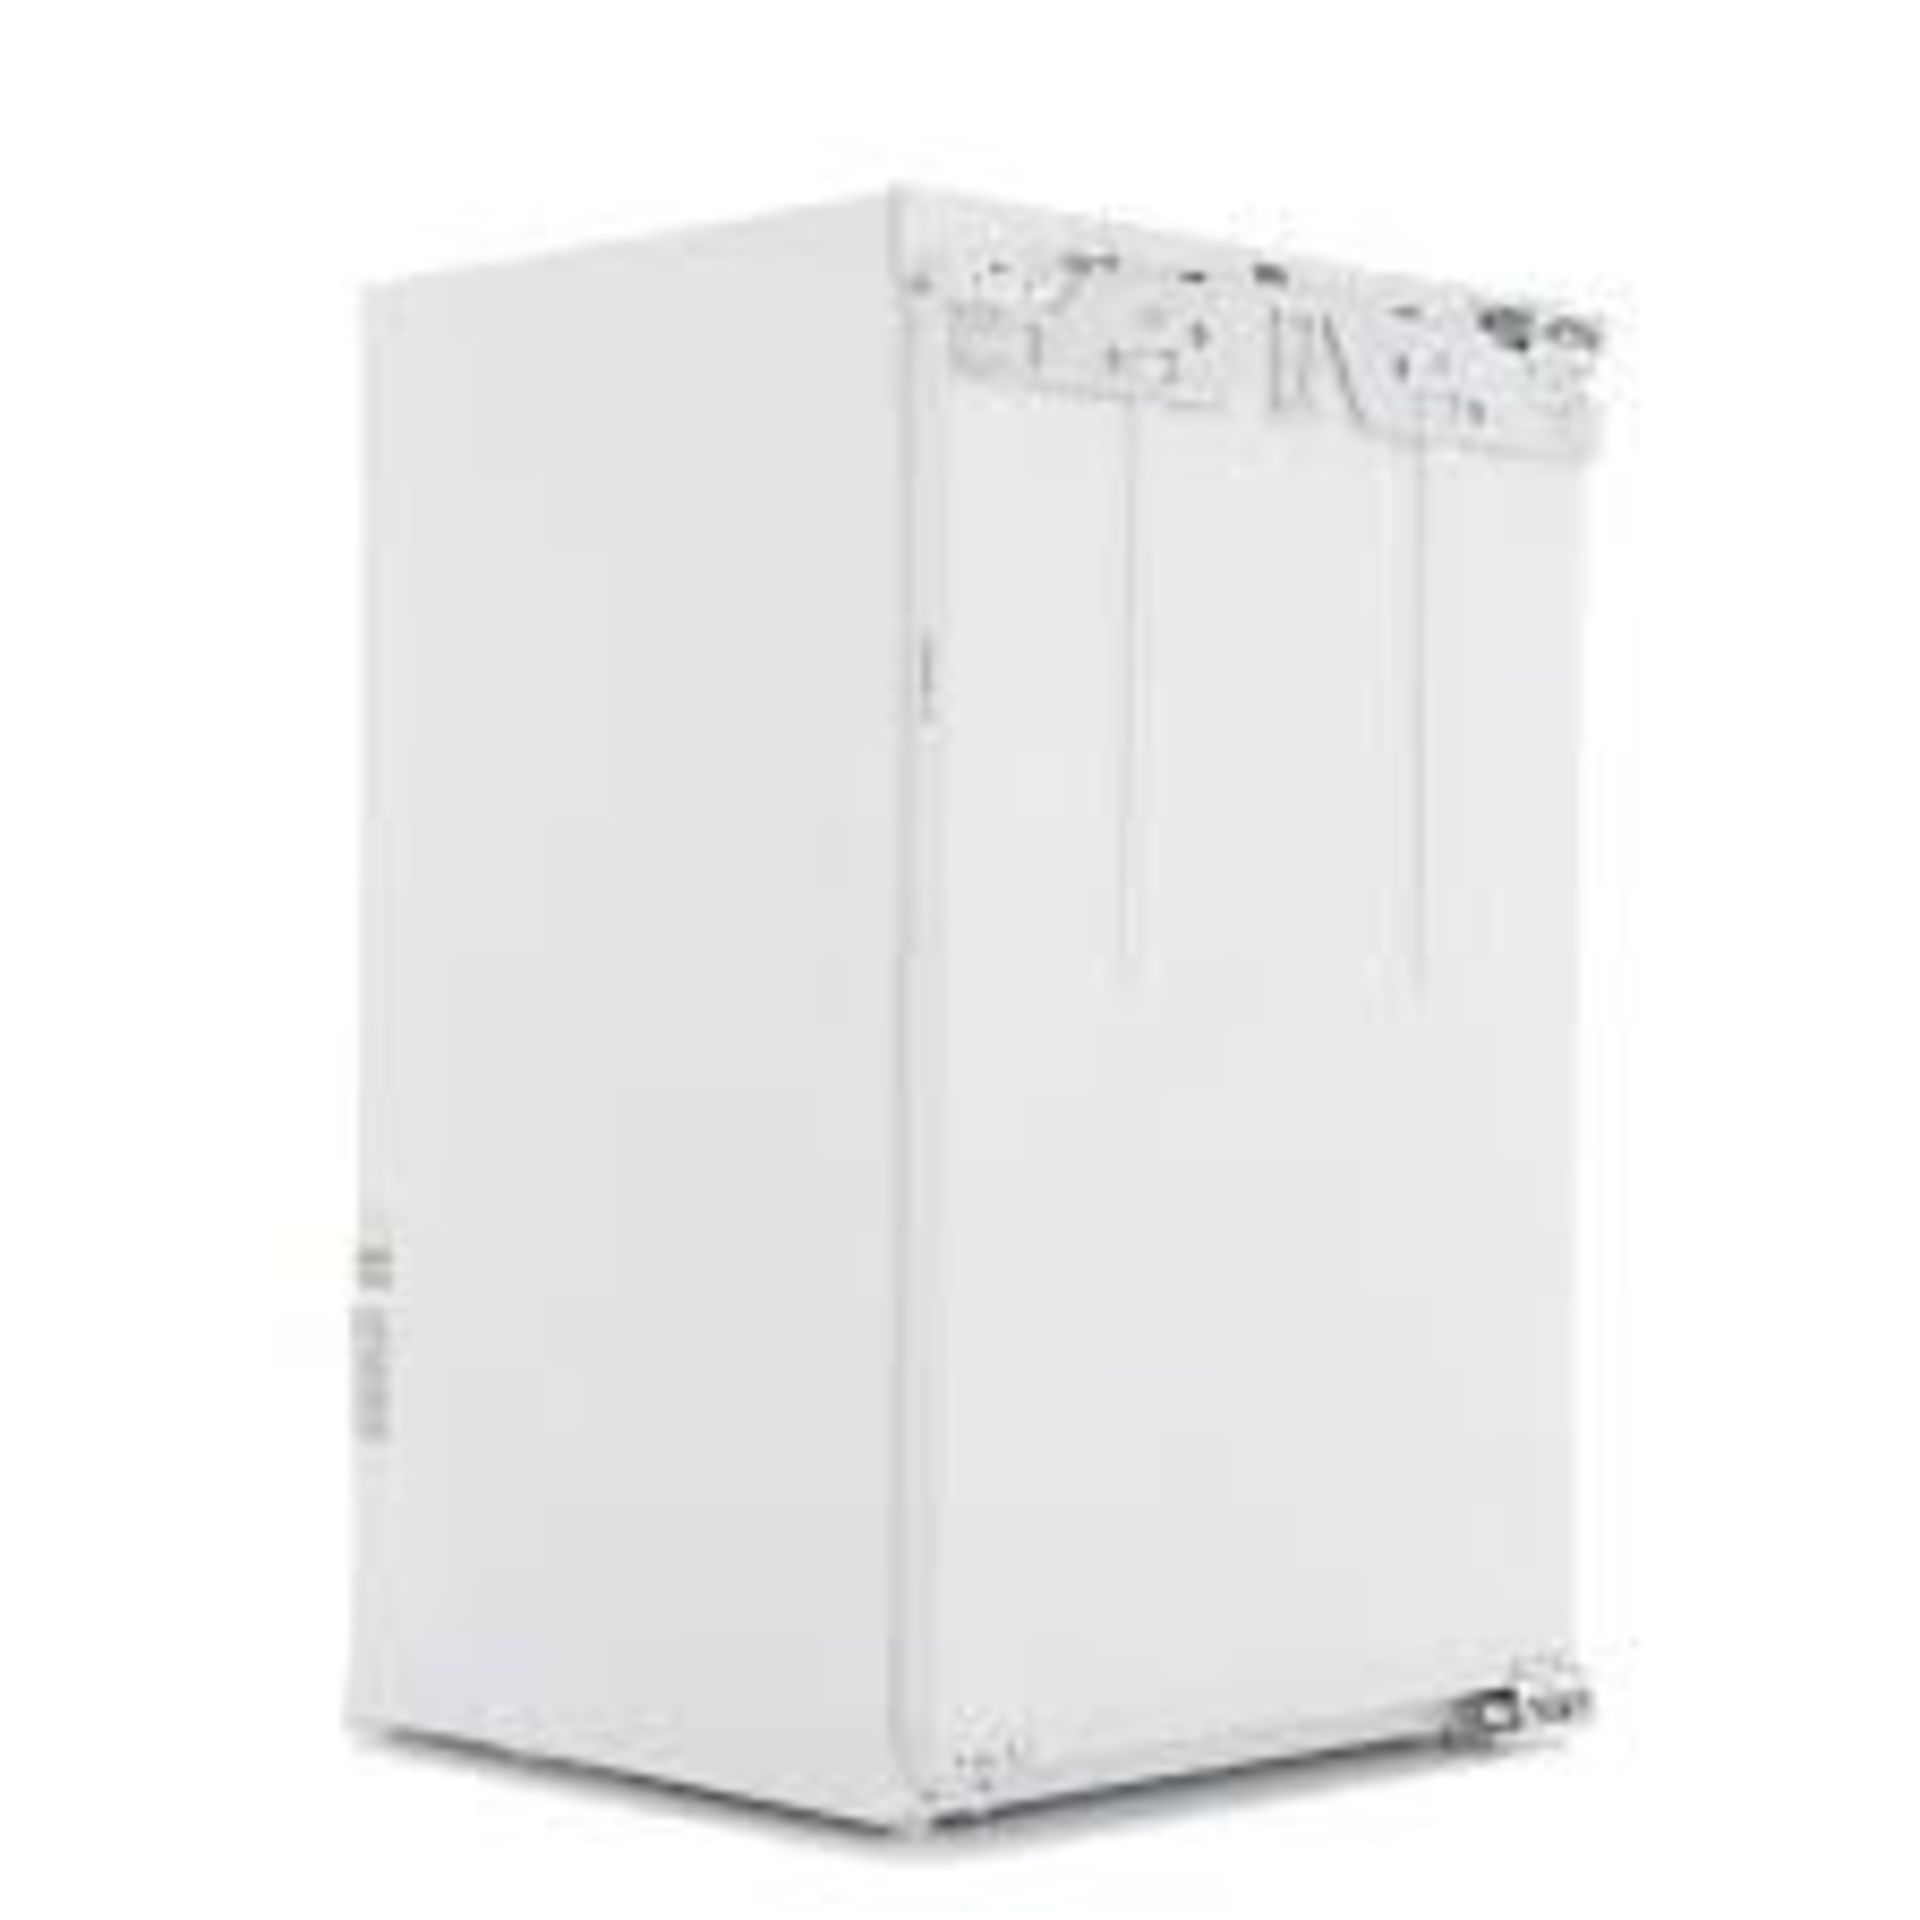 Miele F 32202 i Built in Freezer. - H/S. RRP £899.99. Built-in freezer with VarioRoom and four